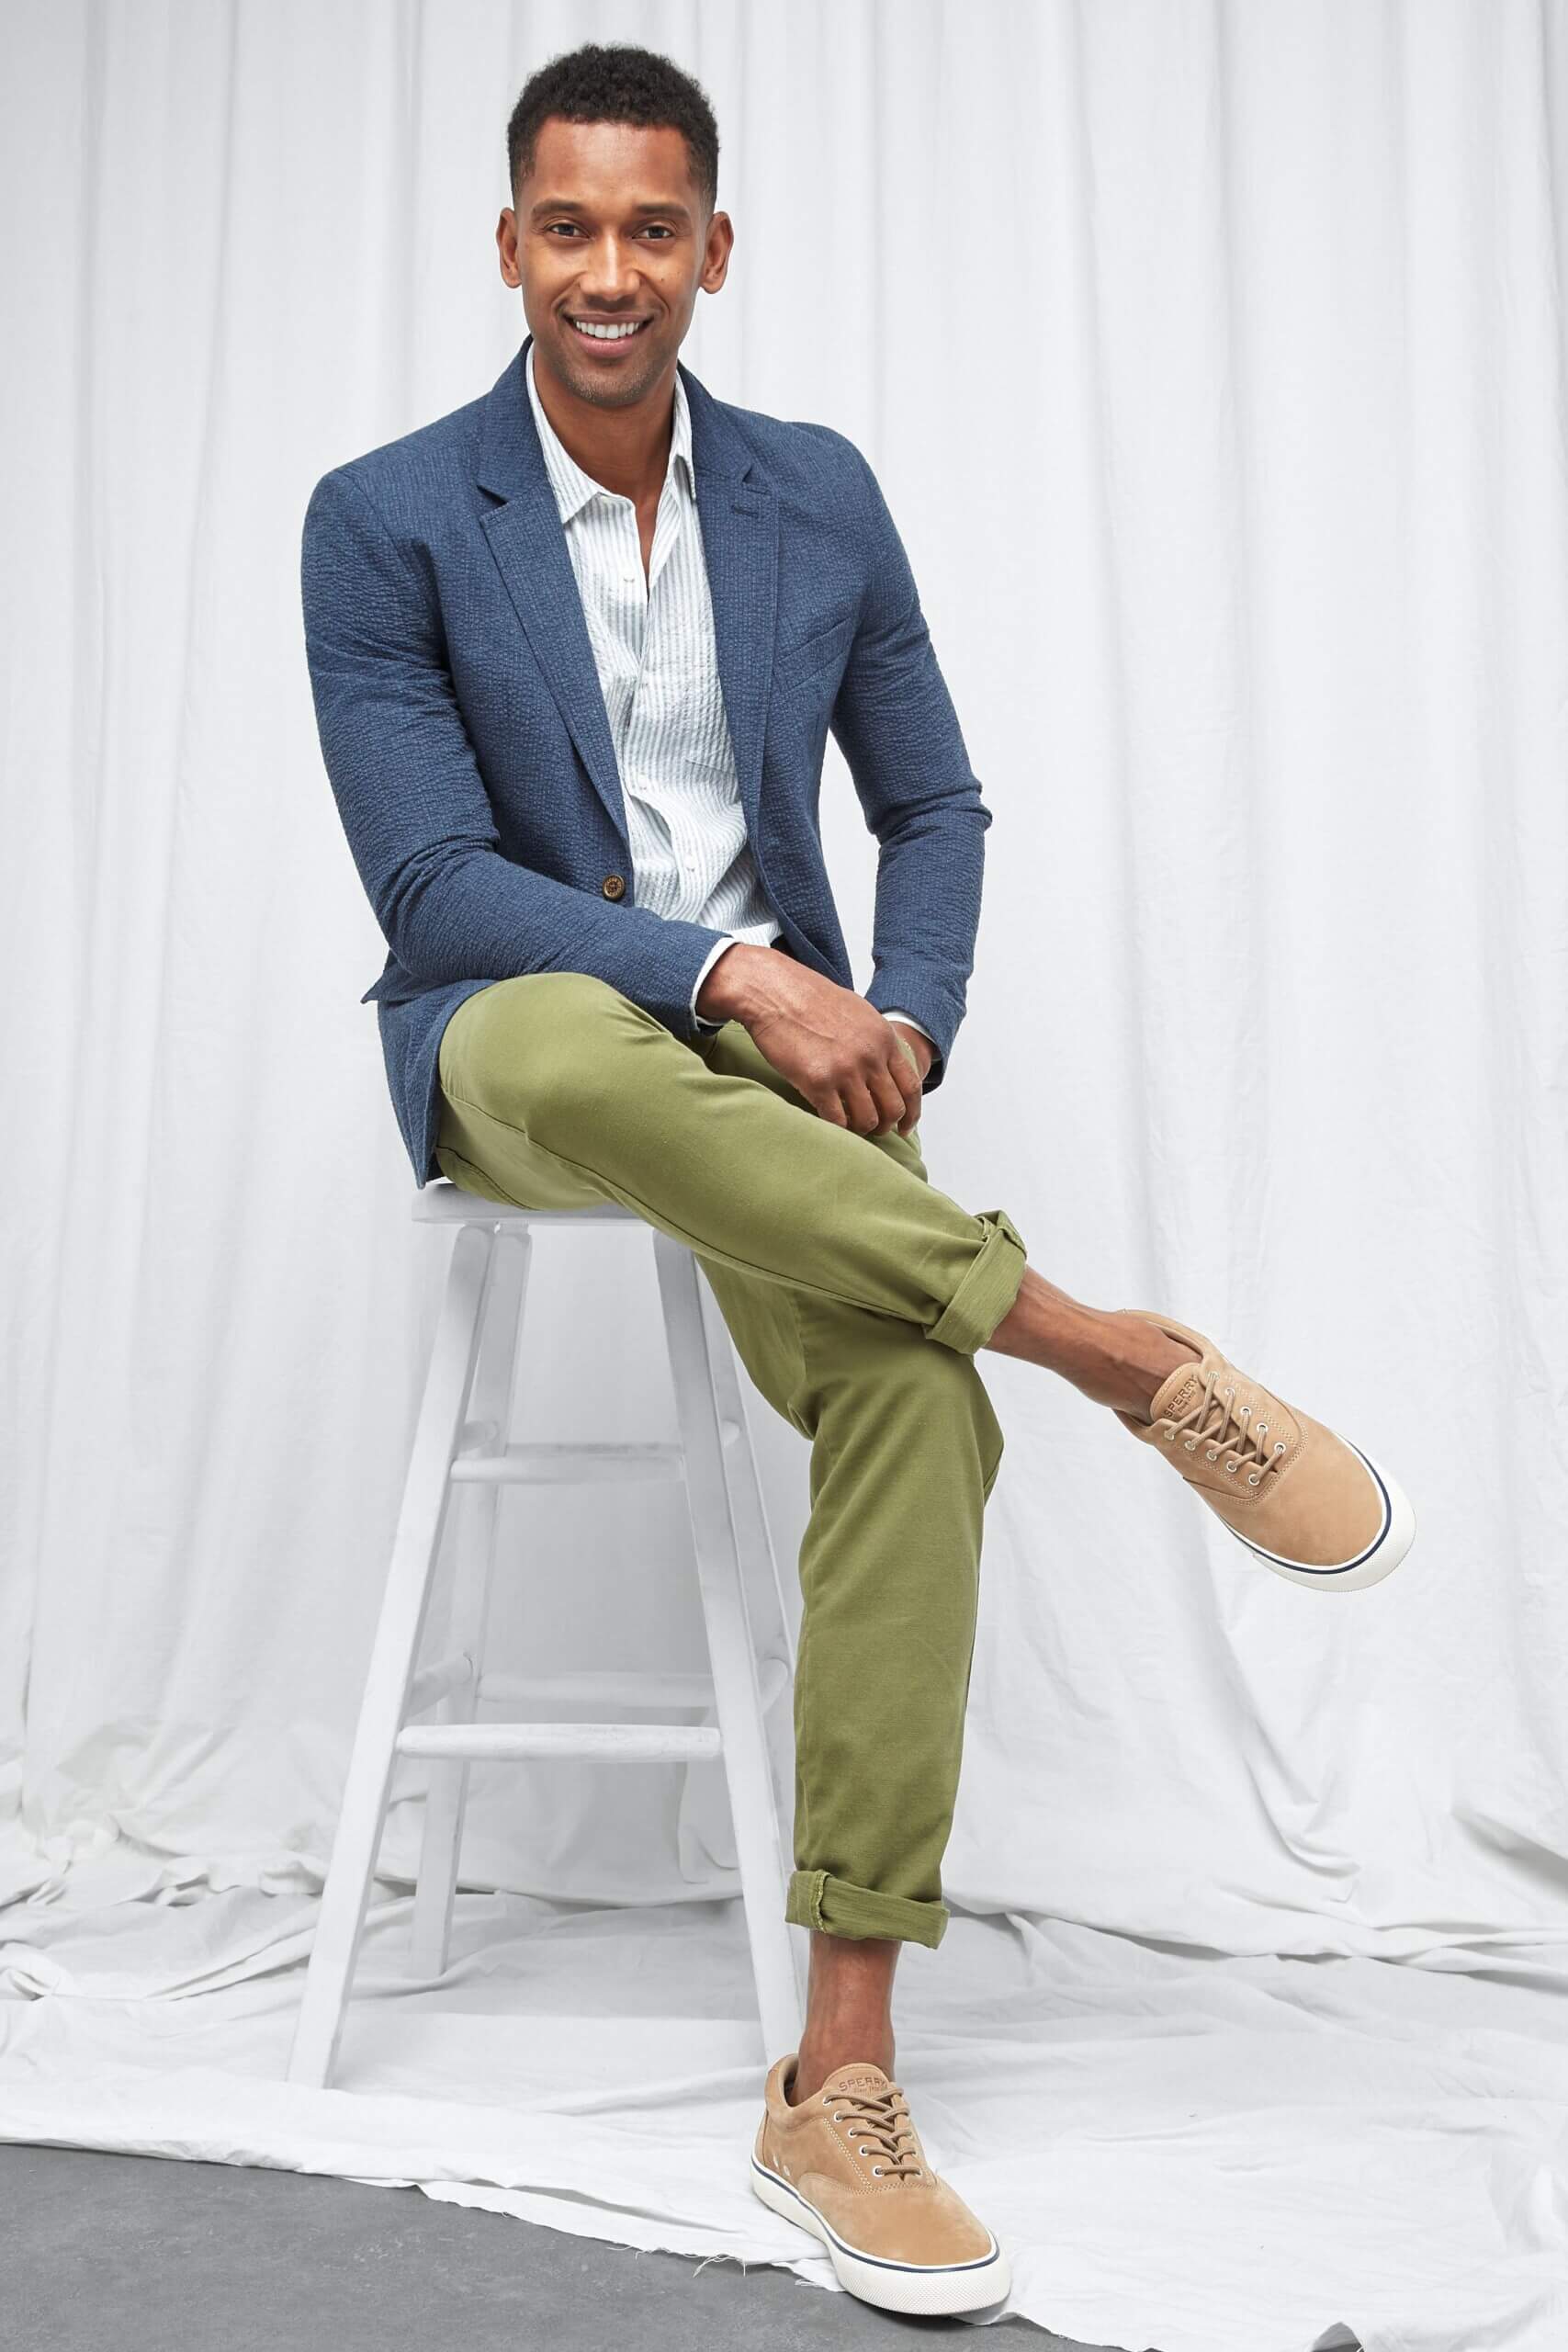 The form Meander Humility How to Dress for a Fall Wedding | Stitch Fix Men